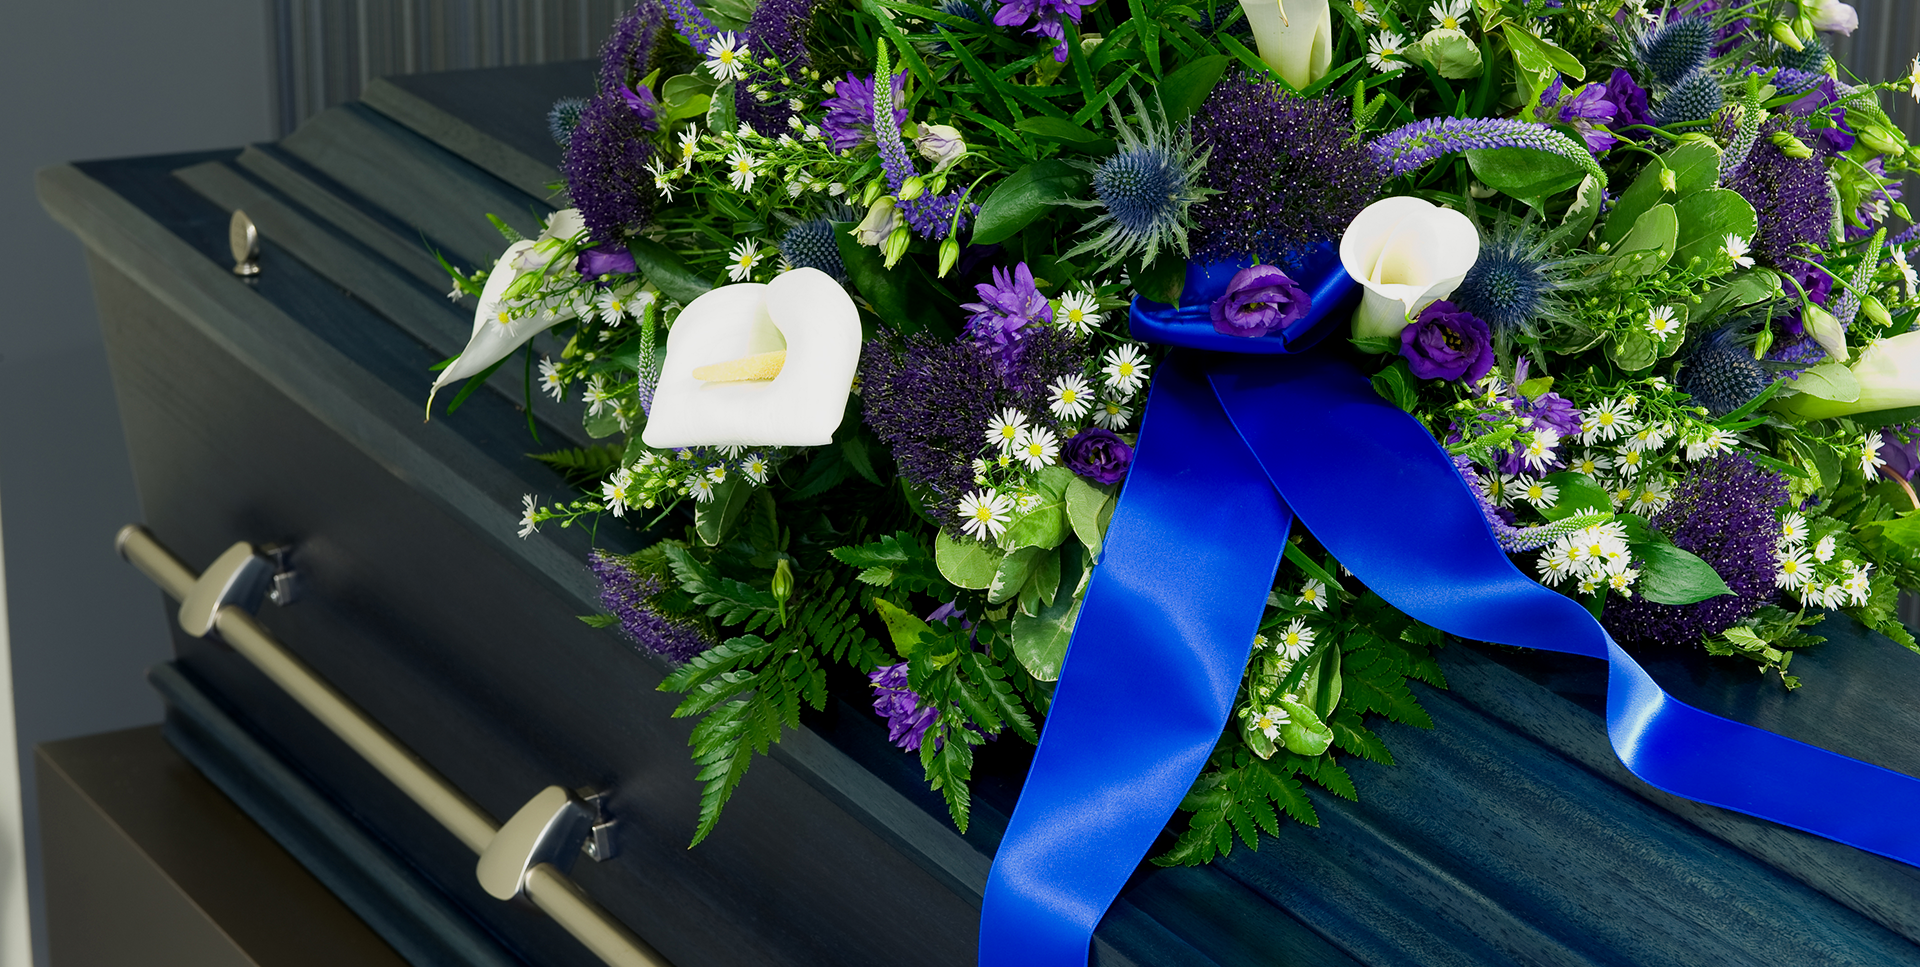 Burial Services and Funeral Services provided by Hayworth Miller Funeral Homes in NC